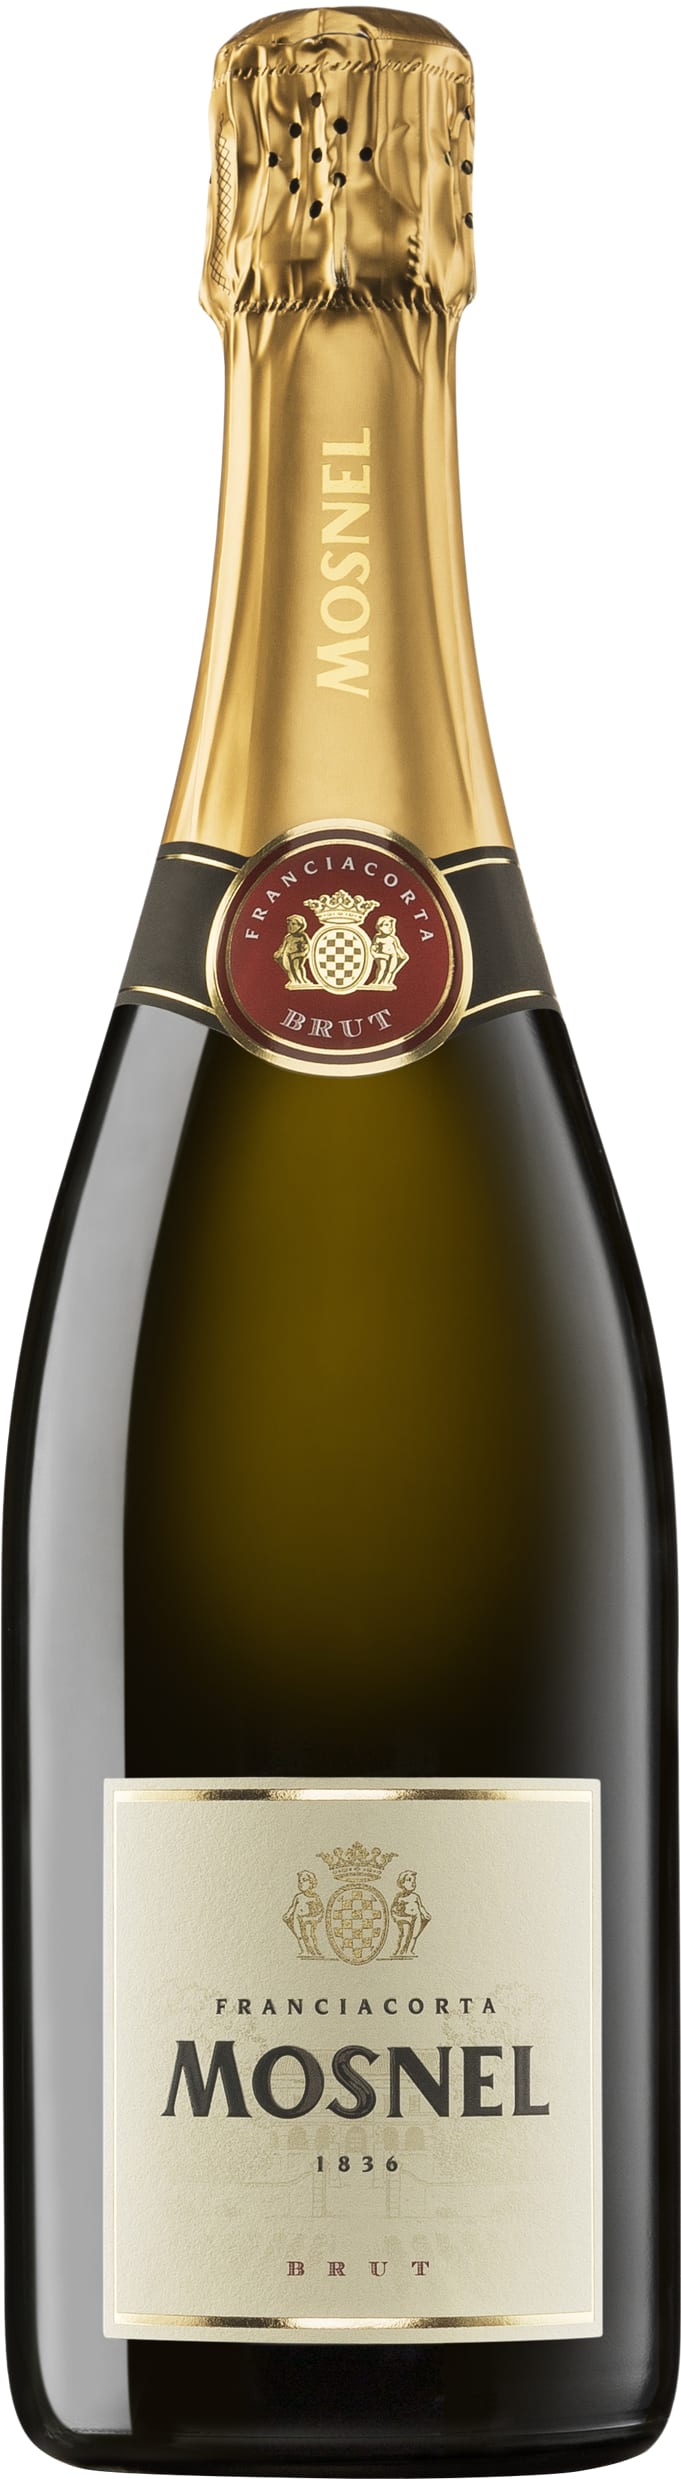 Mosnel Franciacorta Brut 75cl NV - Buy Mosnel Wines from GREAT WINES DIRECT wine shop